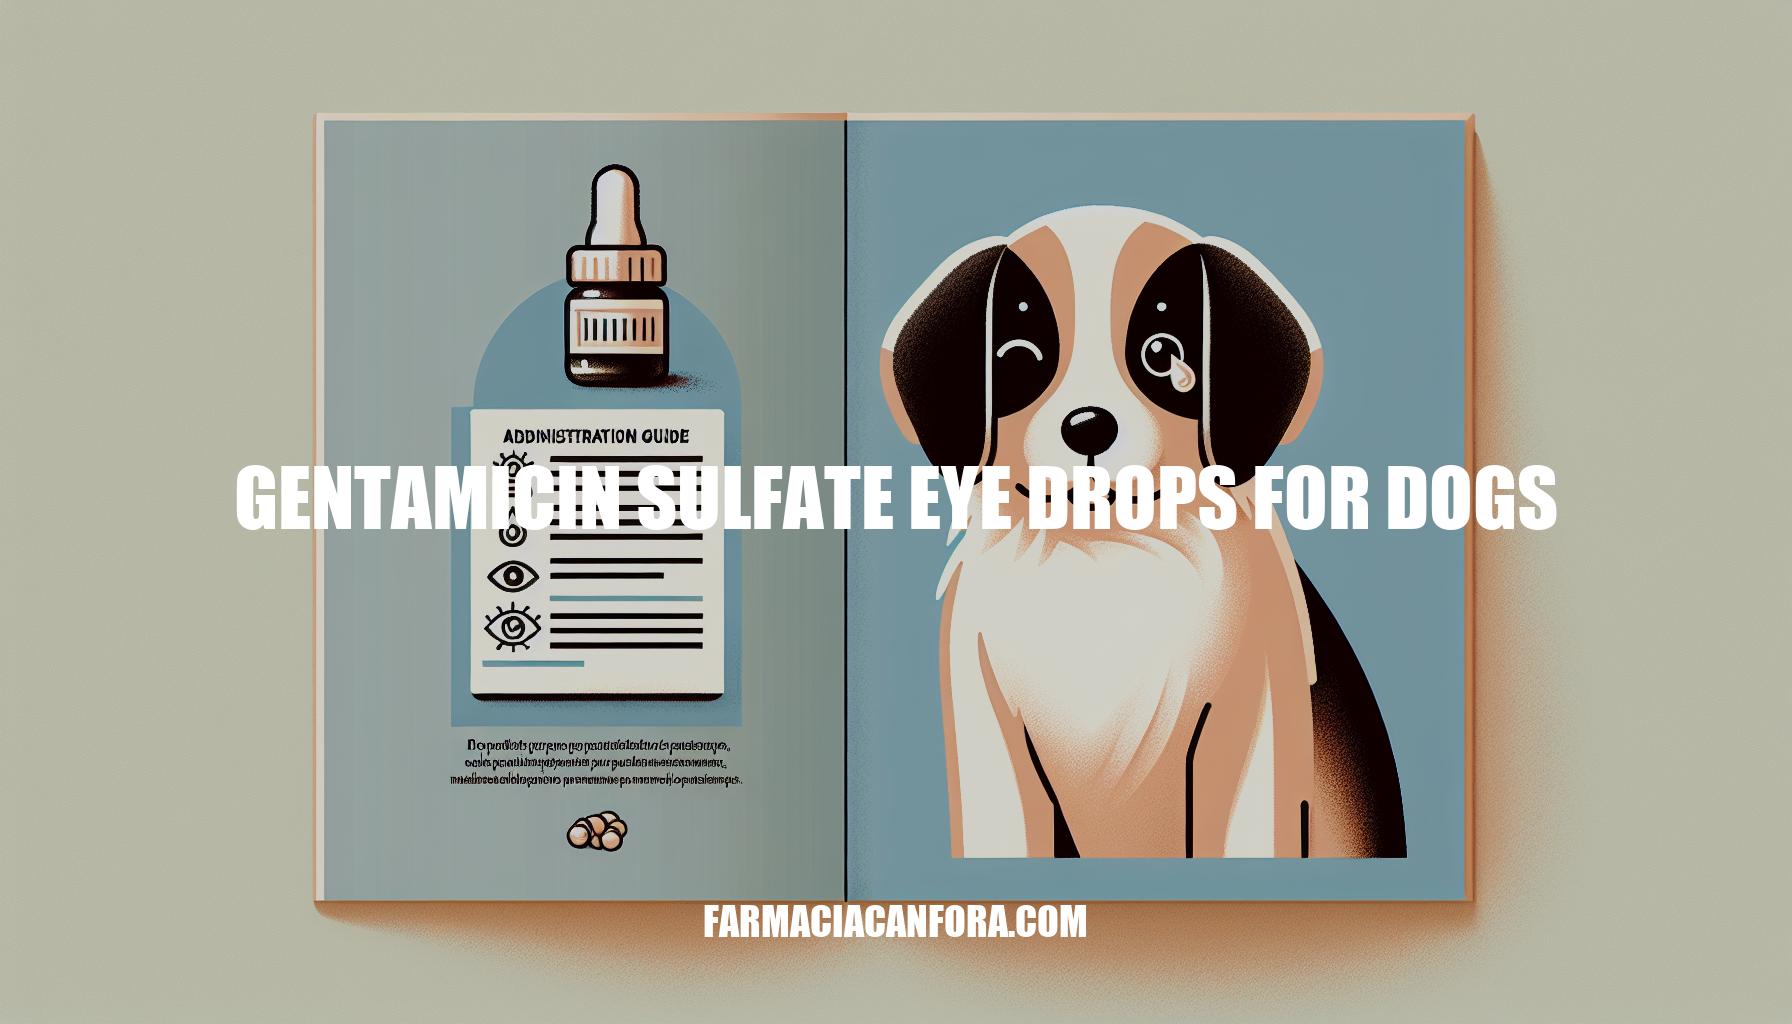 Gentamicin Sulfate Eye Drops for Dogs: Benefits and Administration Guide